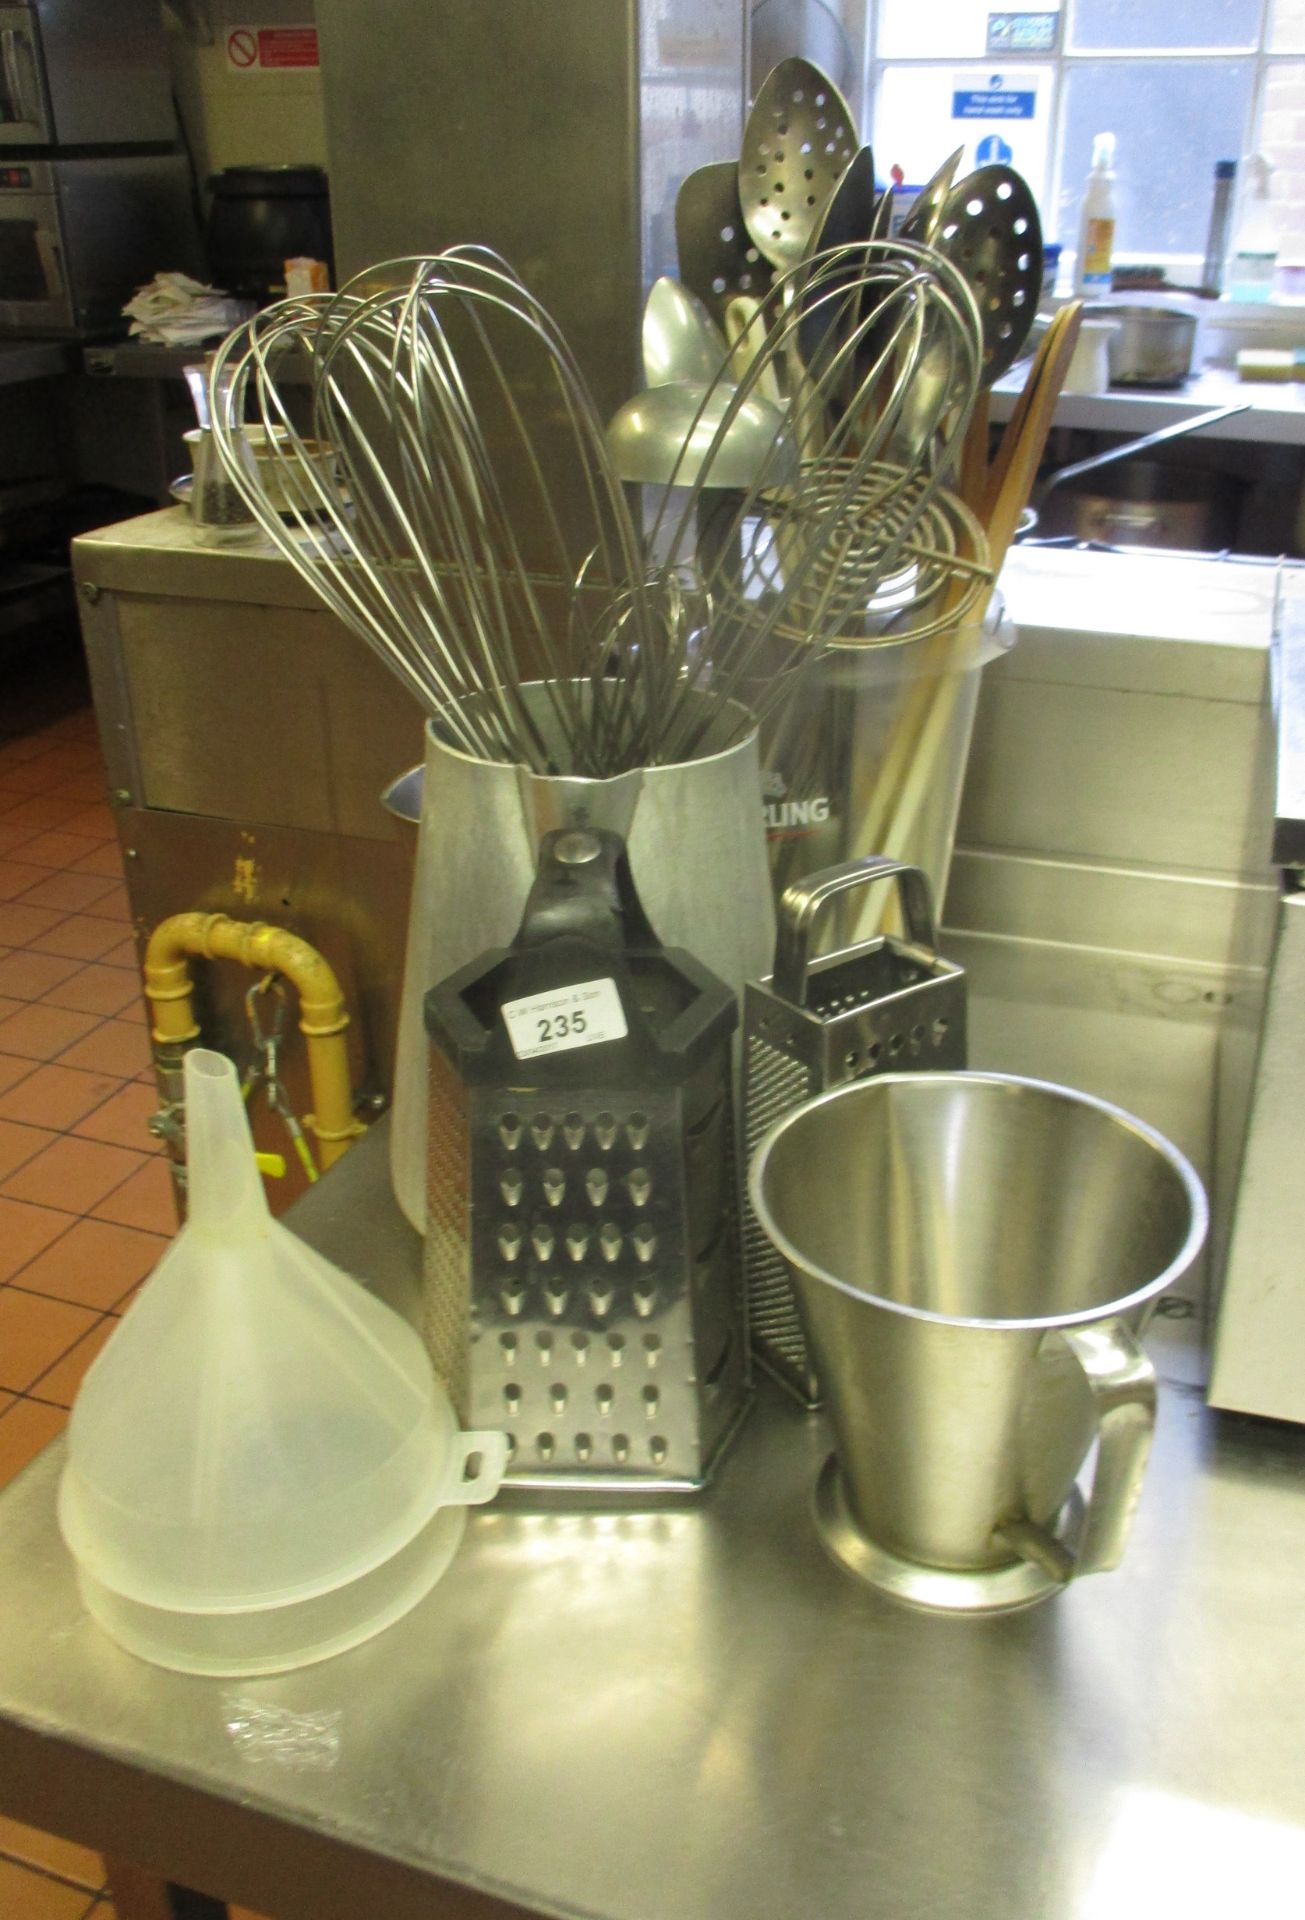 Small quantity of kitchen utensils - whisks, spoons, jugs, etc.